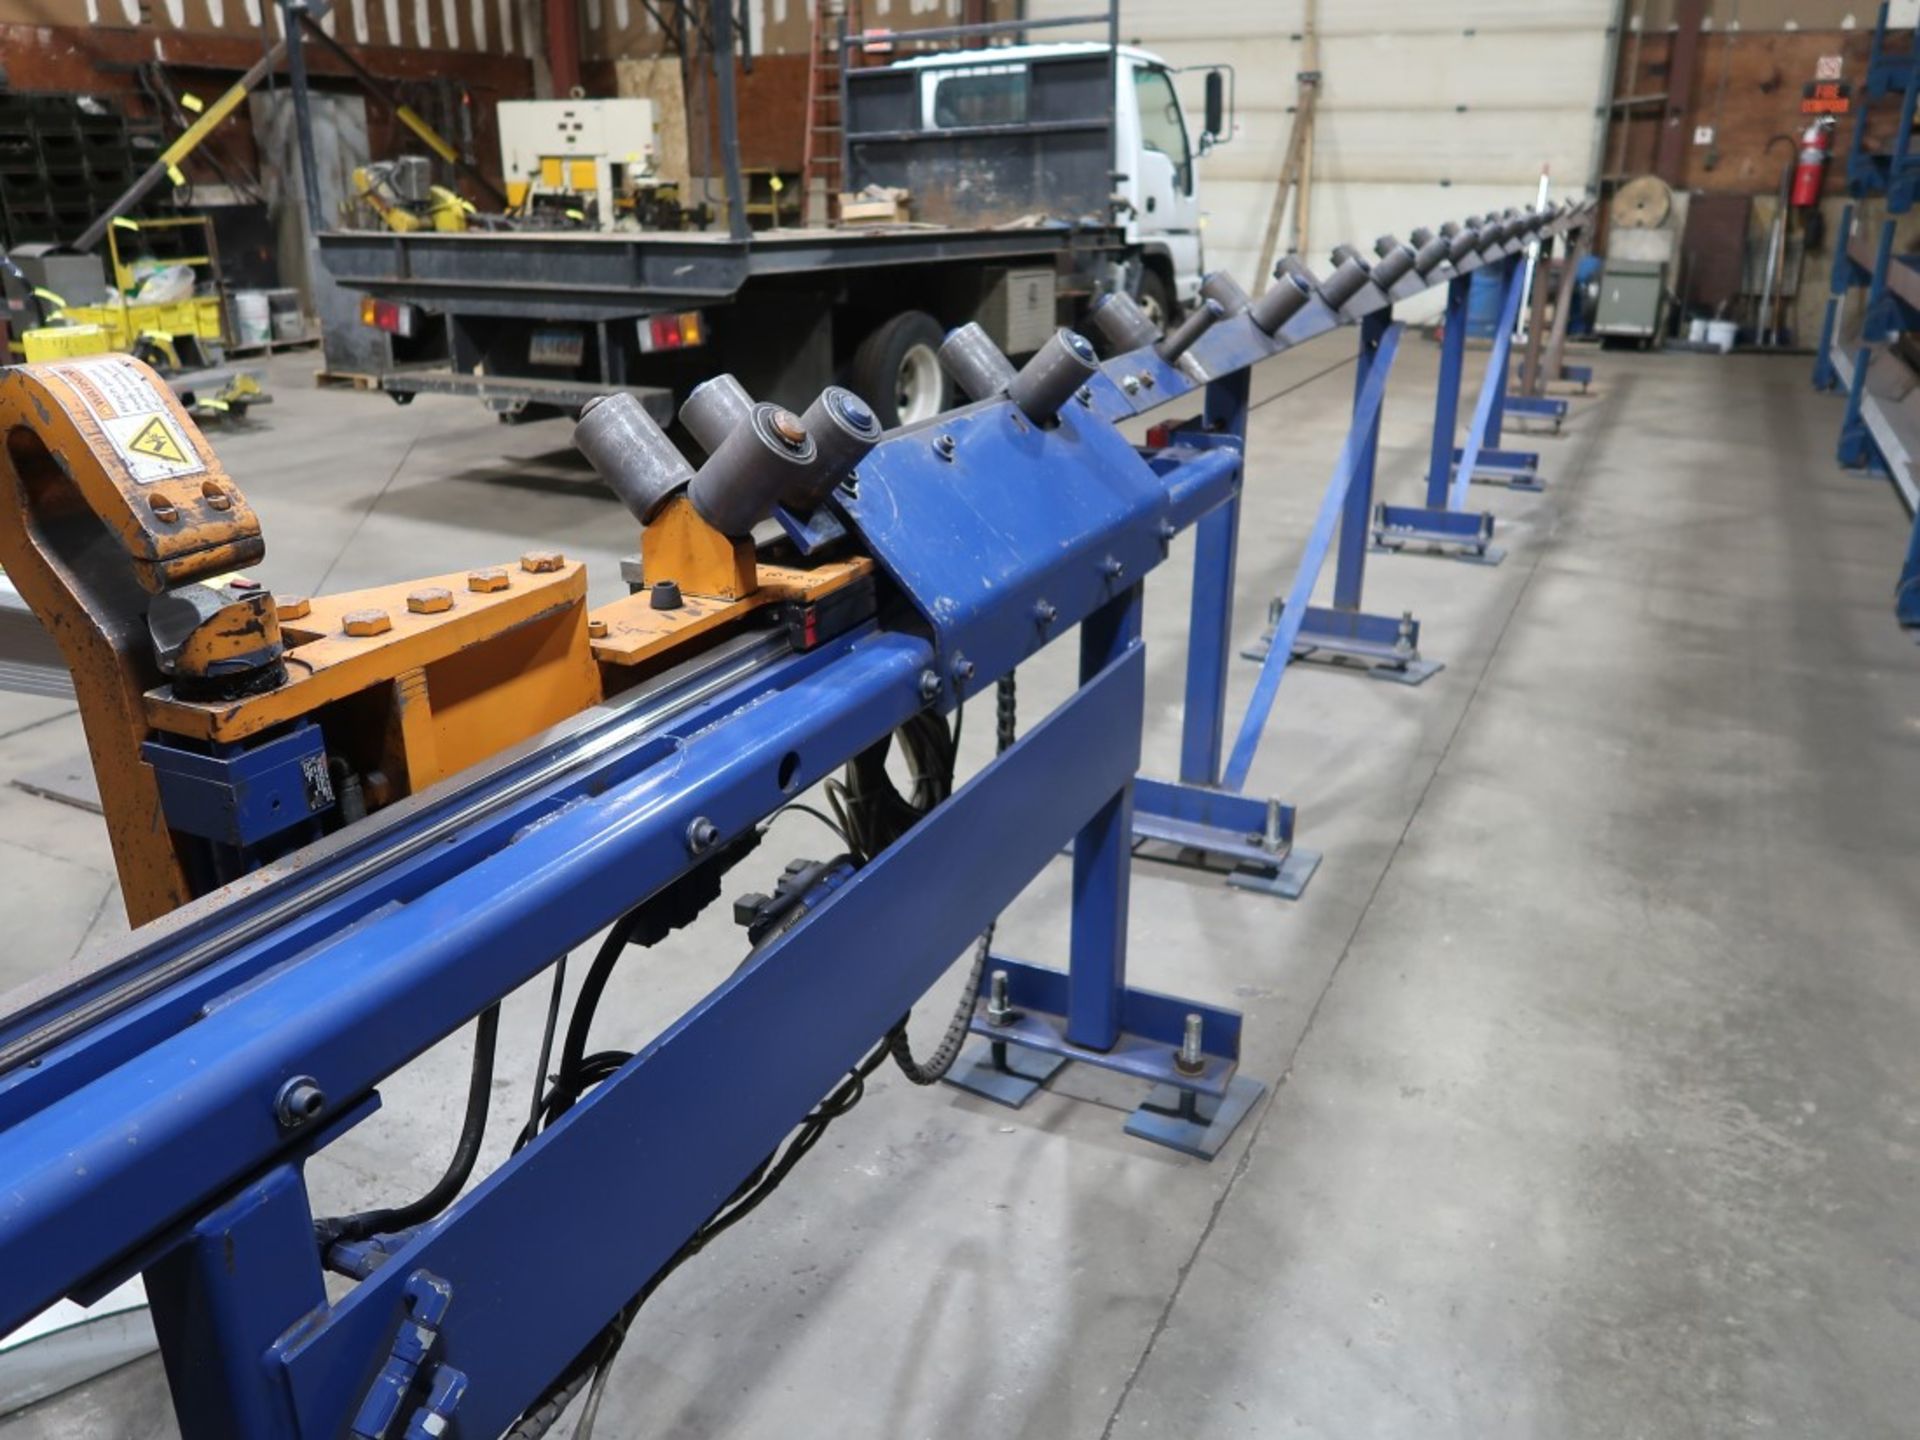 2007 Peddinghaus Ocean Clipper Ironworker S/N 58322, 75 Tons Punch Capacity, 100 Shear Tonnage, - Image 7 of 11